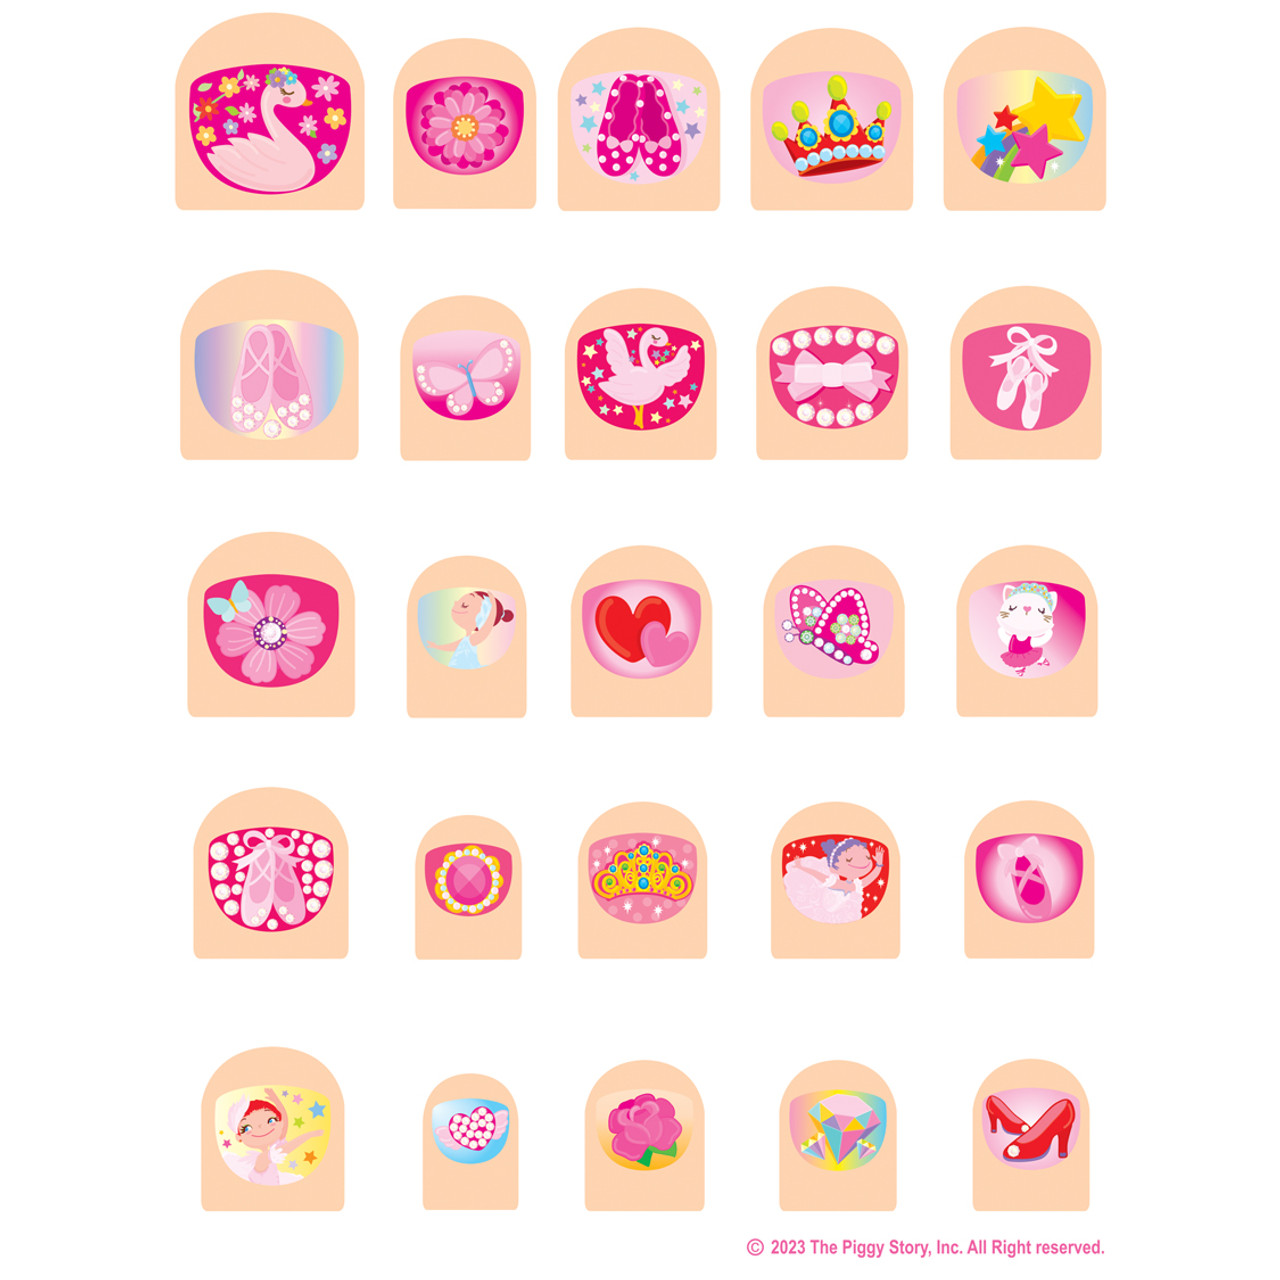 Cutie Stick-On Earring and Nail Sticker Gift Set- Ballerinas